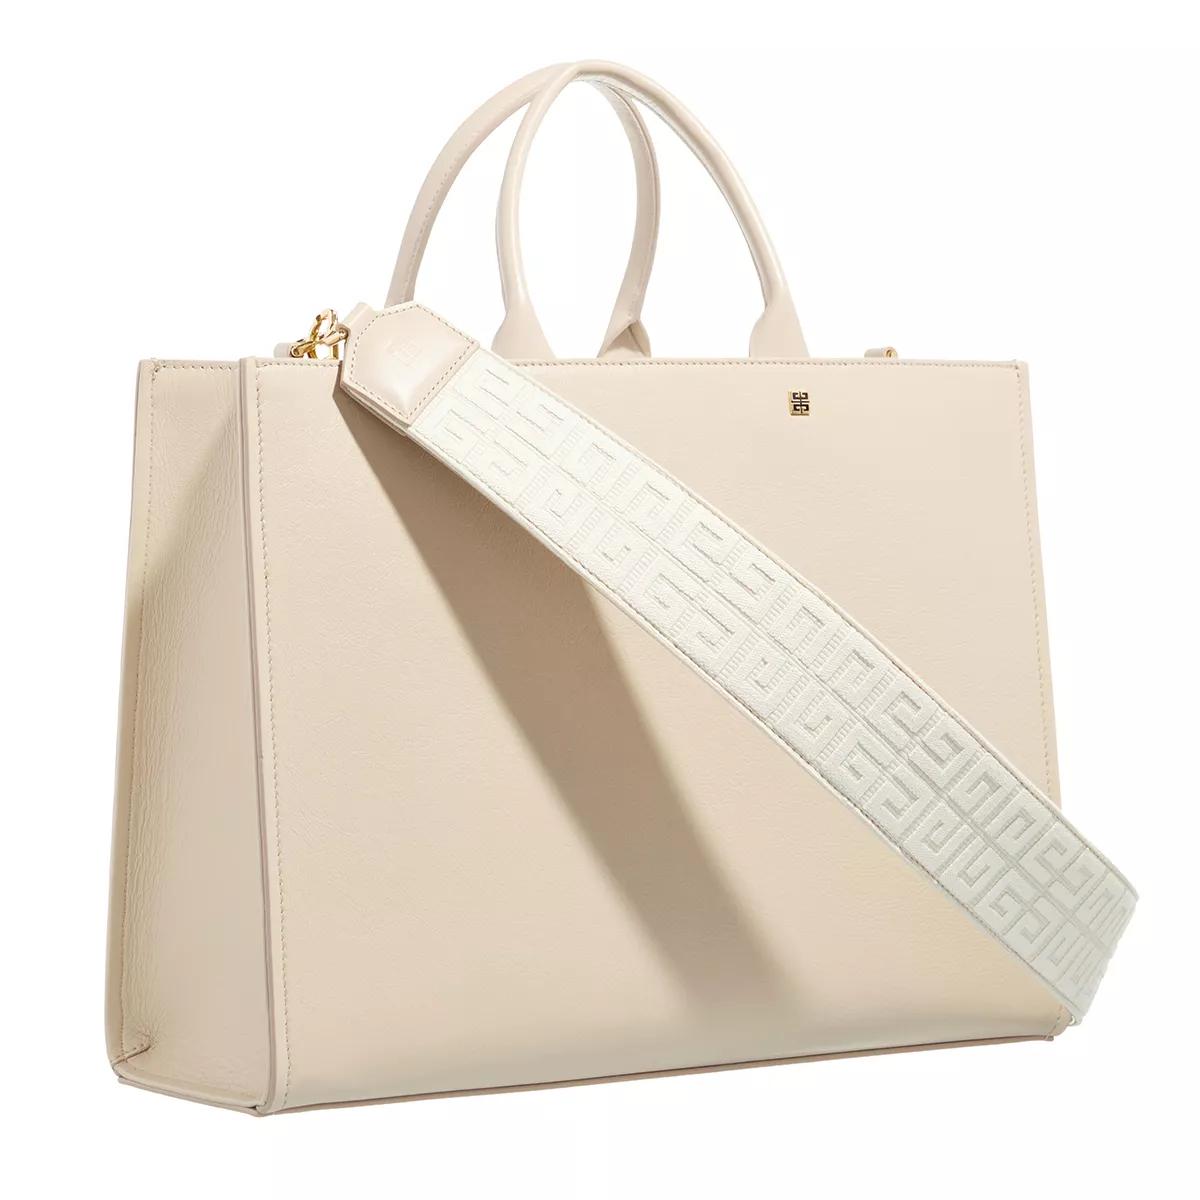 Givenchy Totes G-Tote Medium Tote Bag in beige